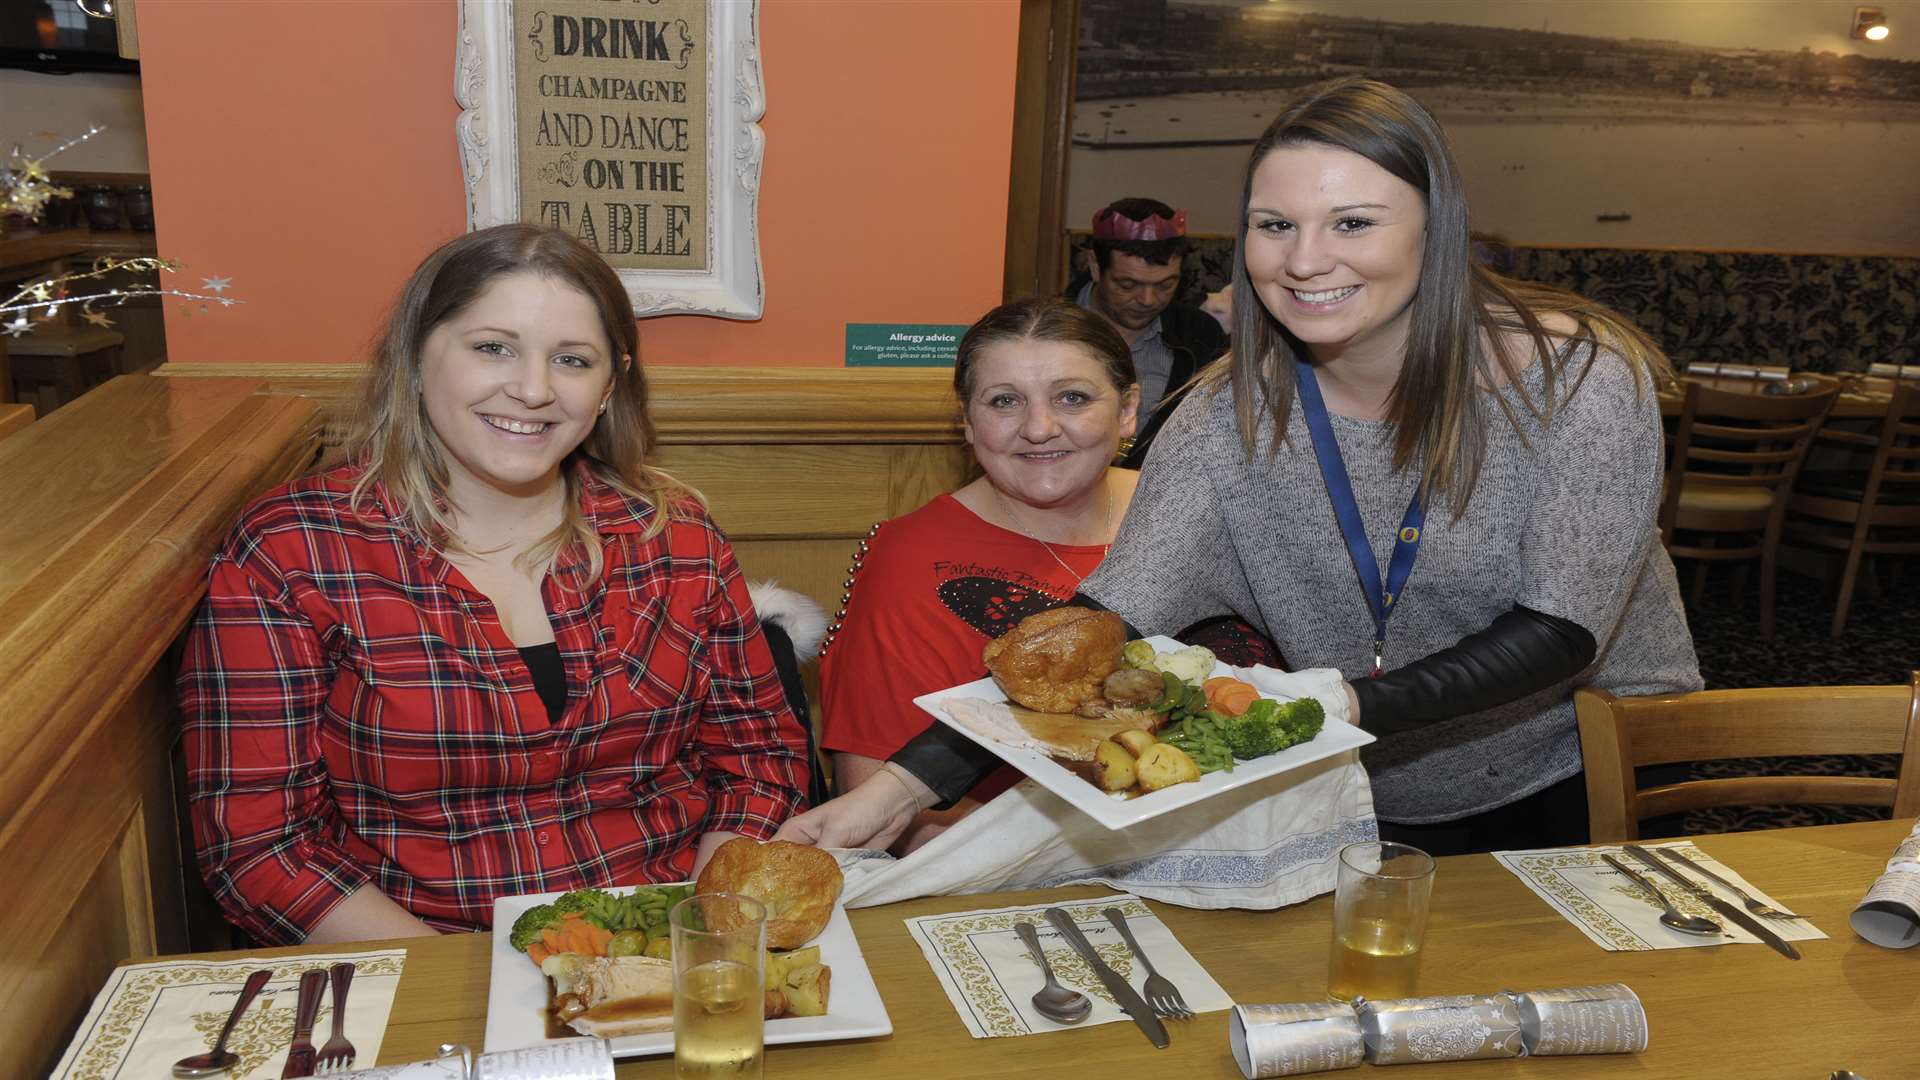 Eloise Brophy, Sue Driscle and India Blythe at The Hoy free Christmas dinner event